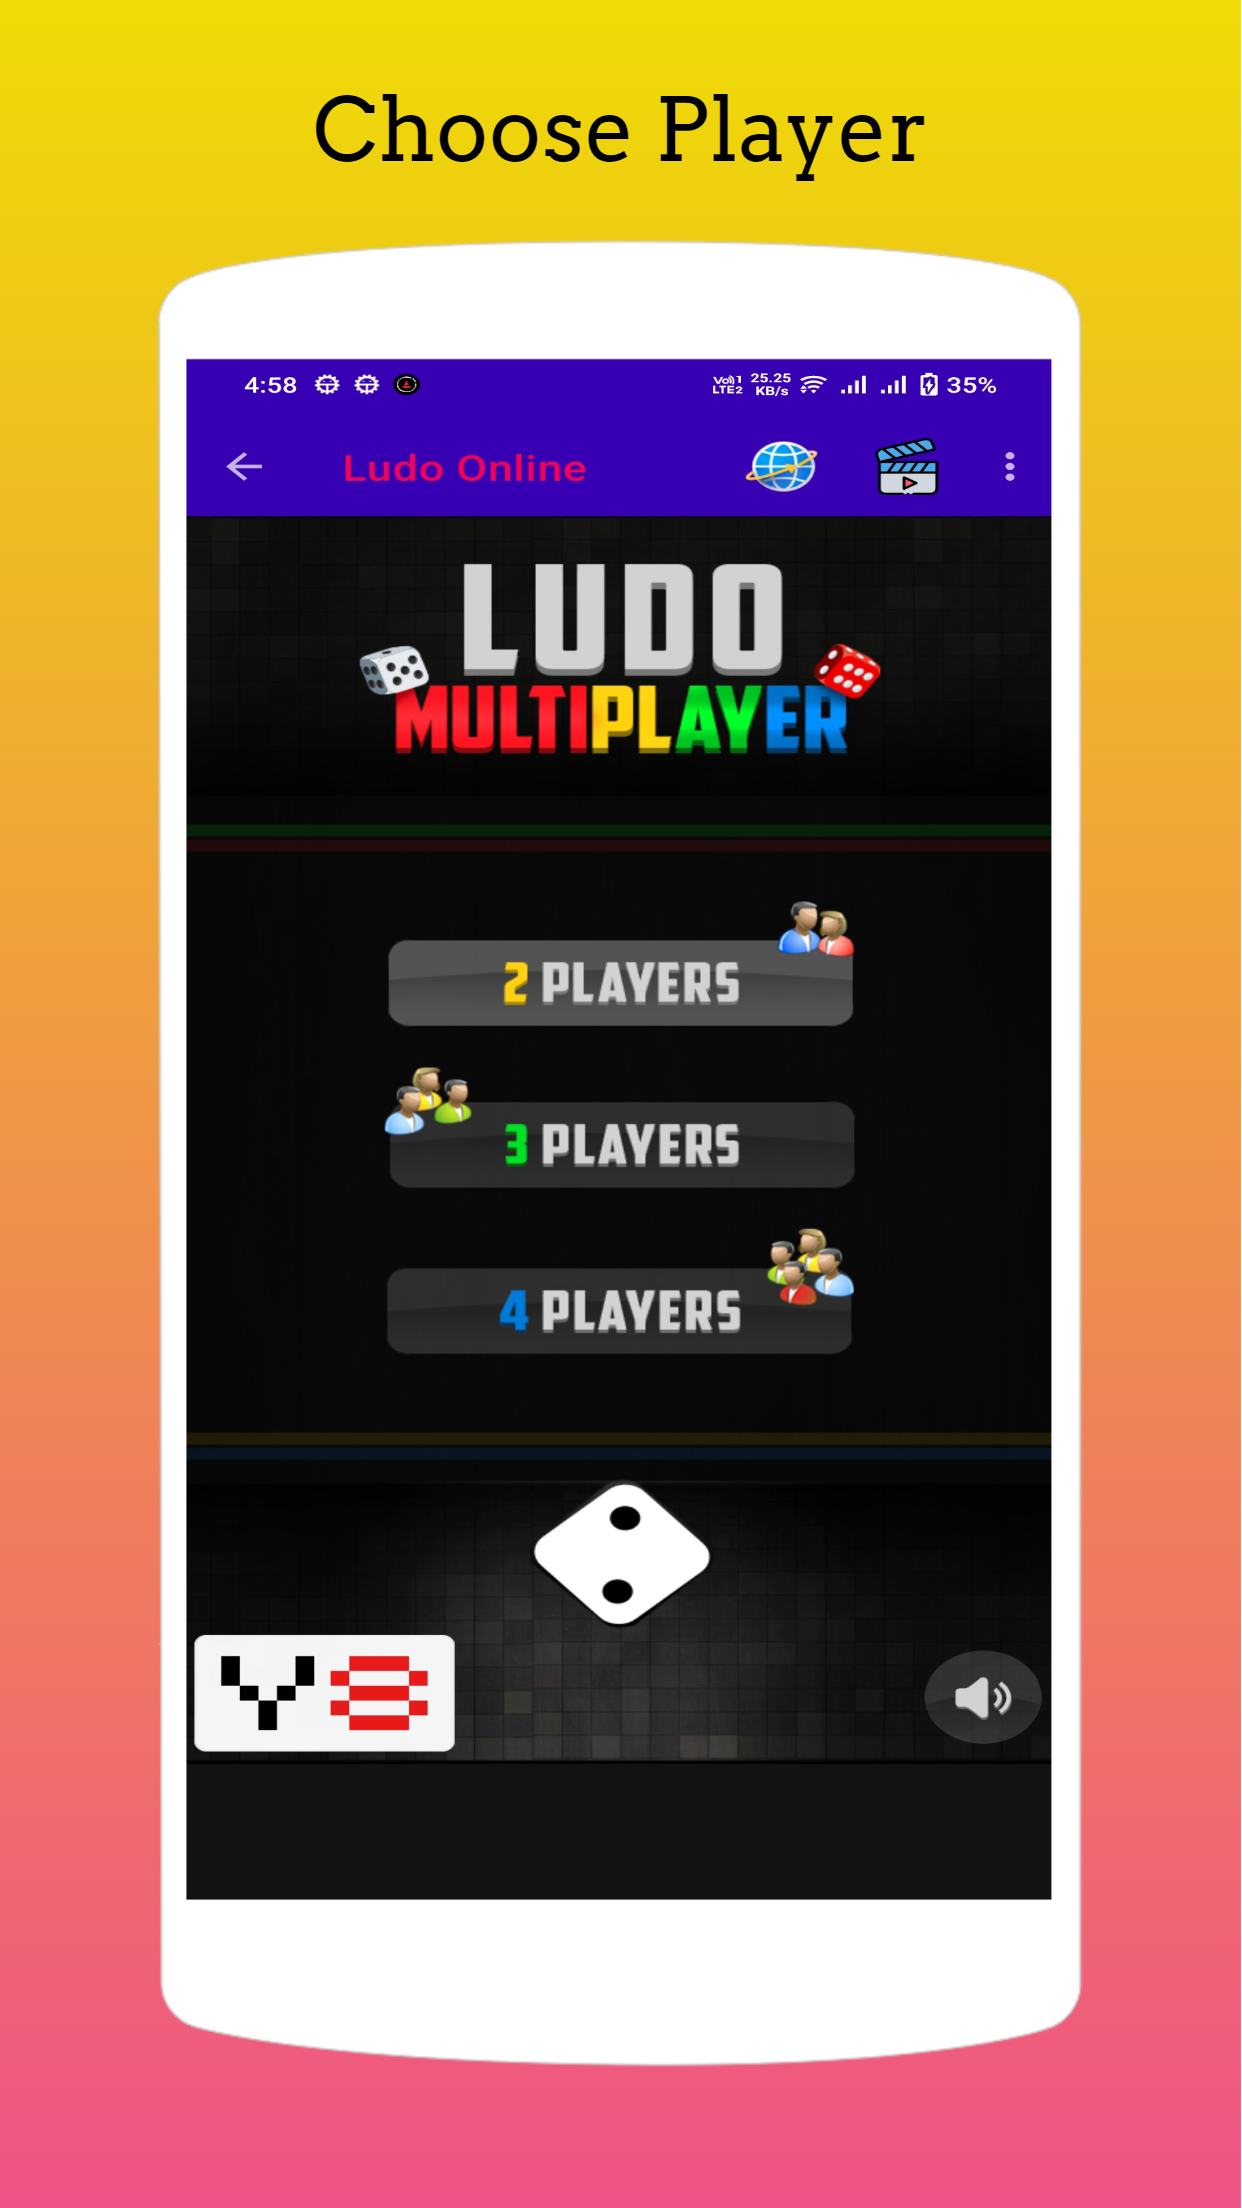 Ludo Game 2 Players, Ludo King 2 Players